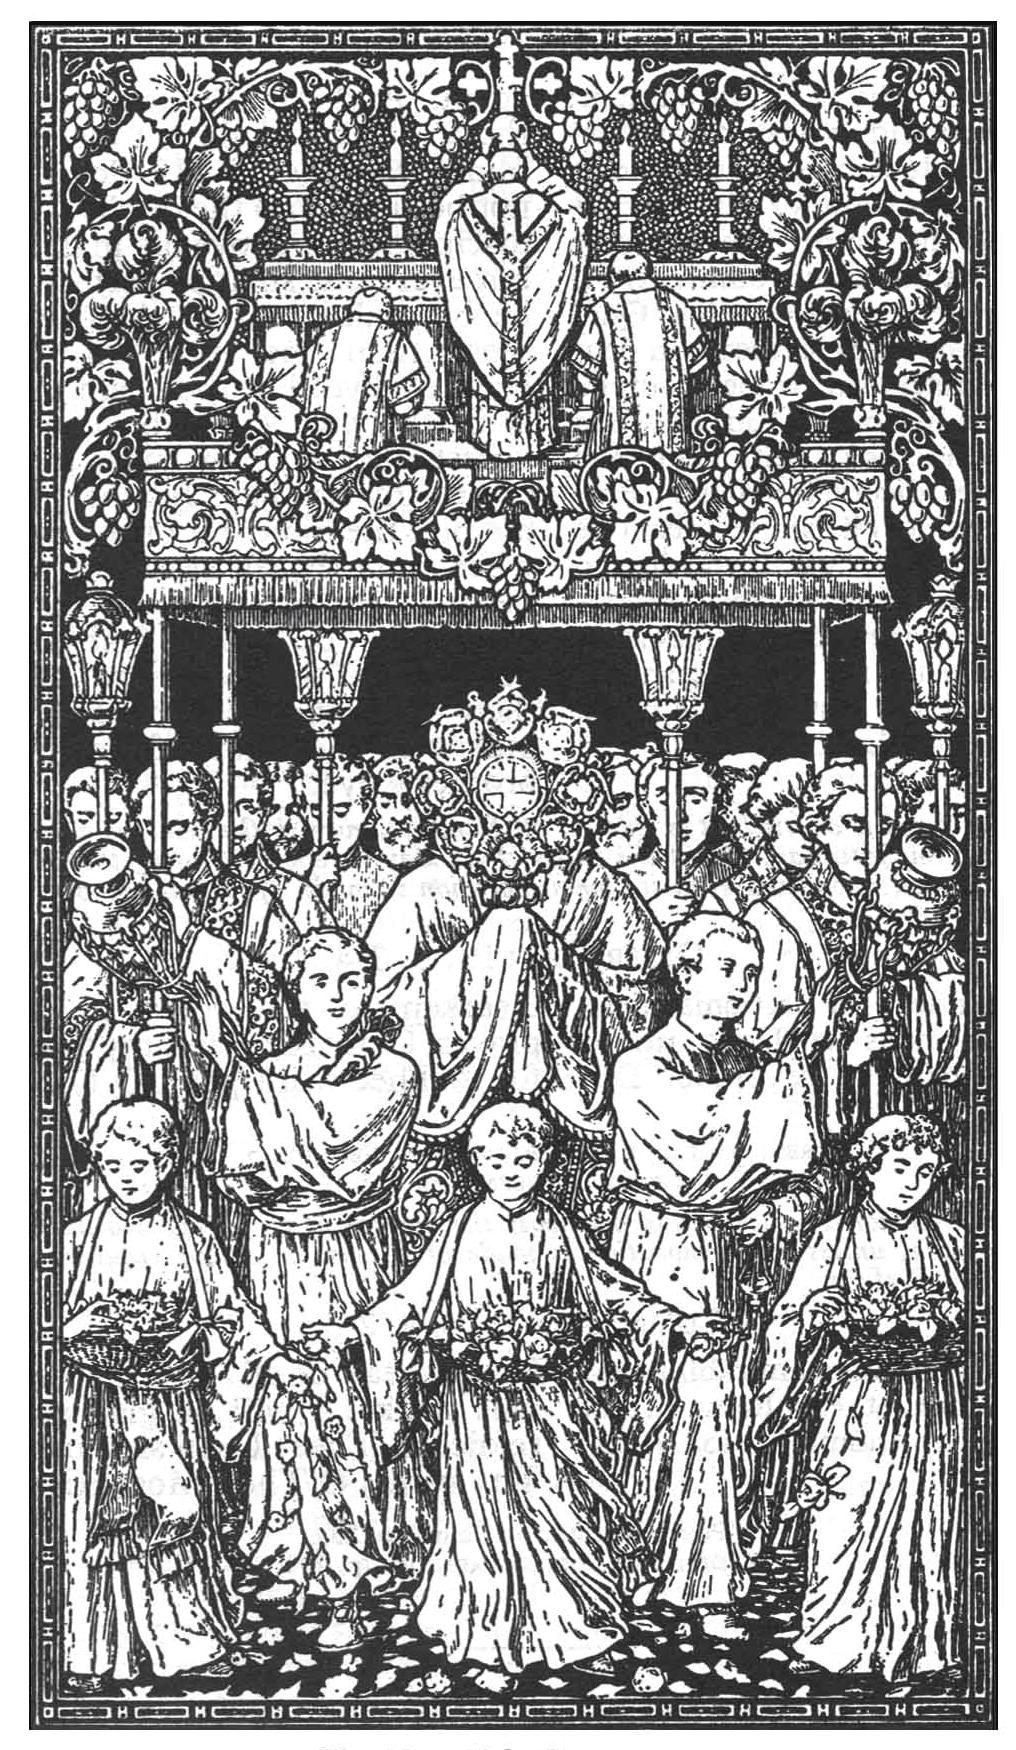 The Solemnity of Corpus Christi Sunday, 22 June, 2014 ORDER OF WORSHIP June 15 Most Holy Trinity The Order of Mass can be found in the Missalette 6:00pm: Solemn Mass with the Cathedral Choir 7:15pm: